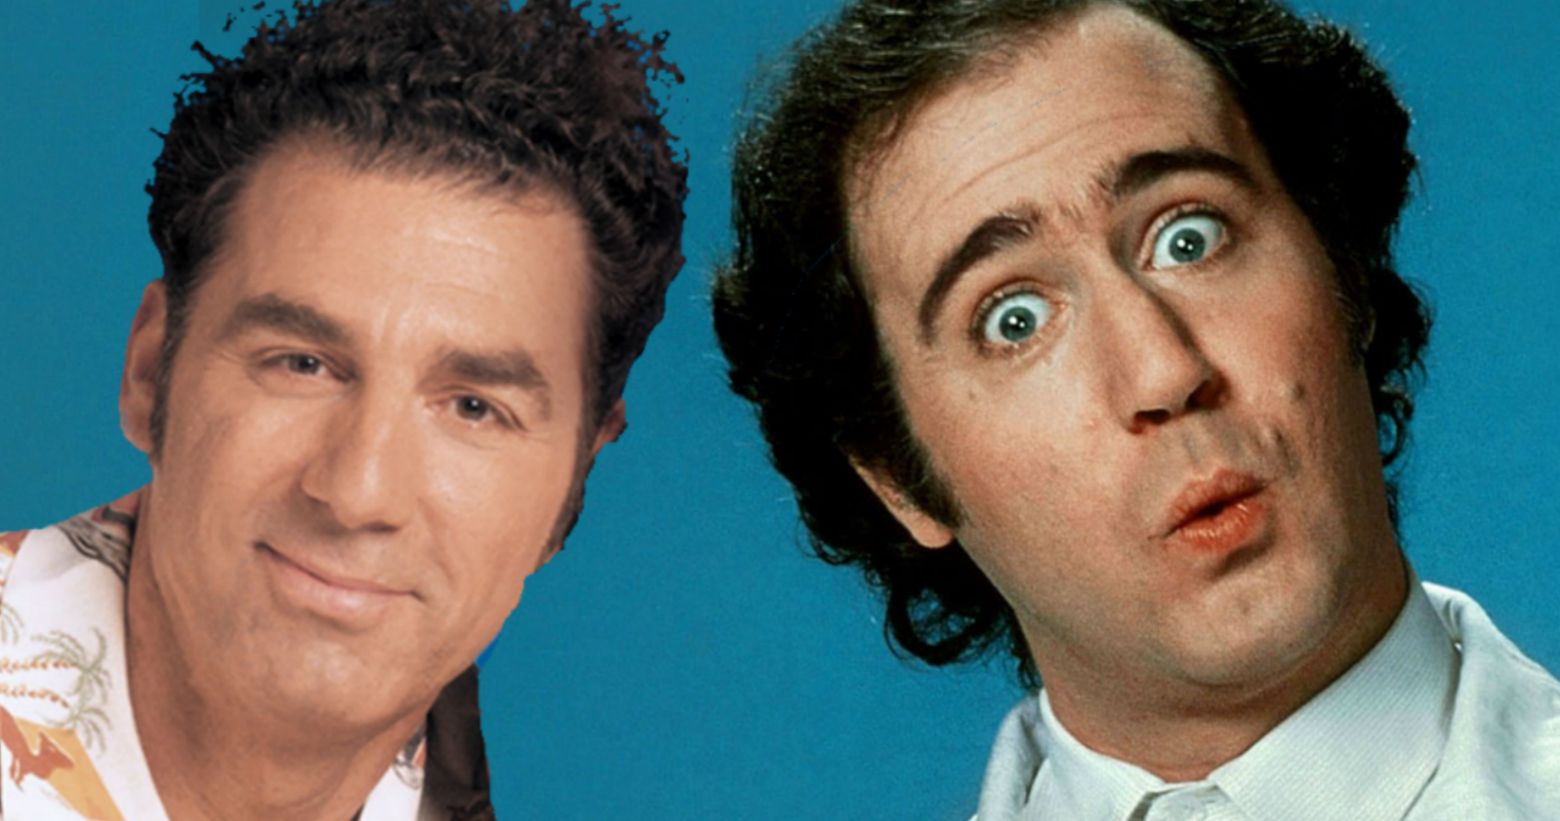 Jerry Seinfeld Thinks Andy Kaufman Could Have Pulled Off Playing Kramer